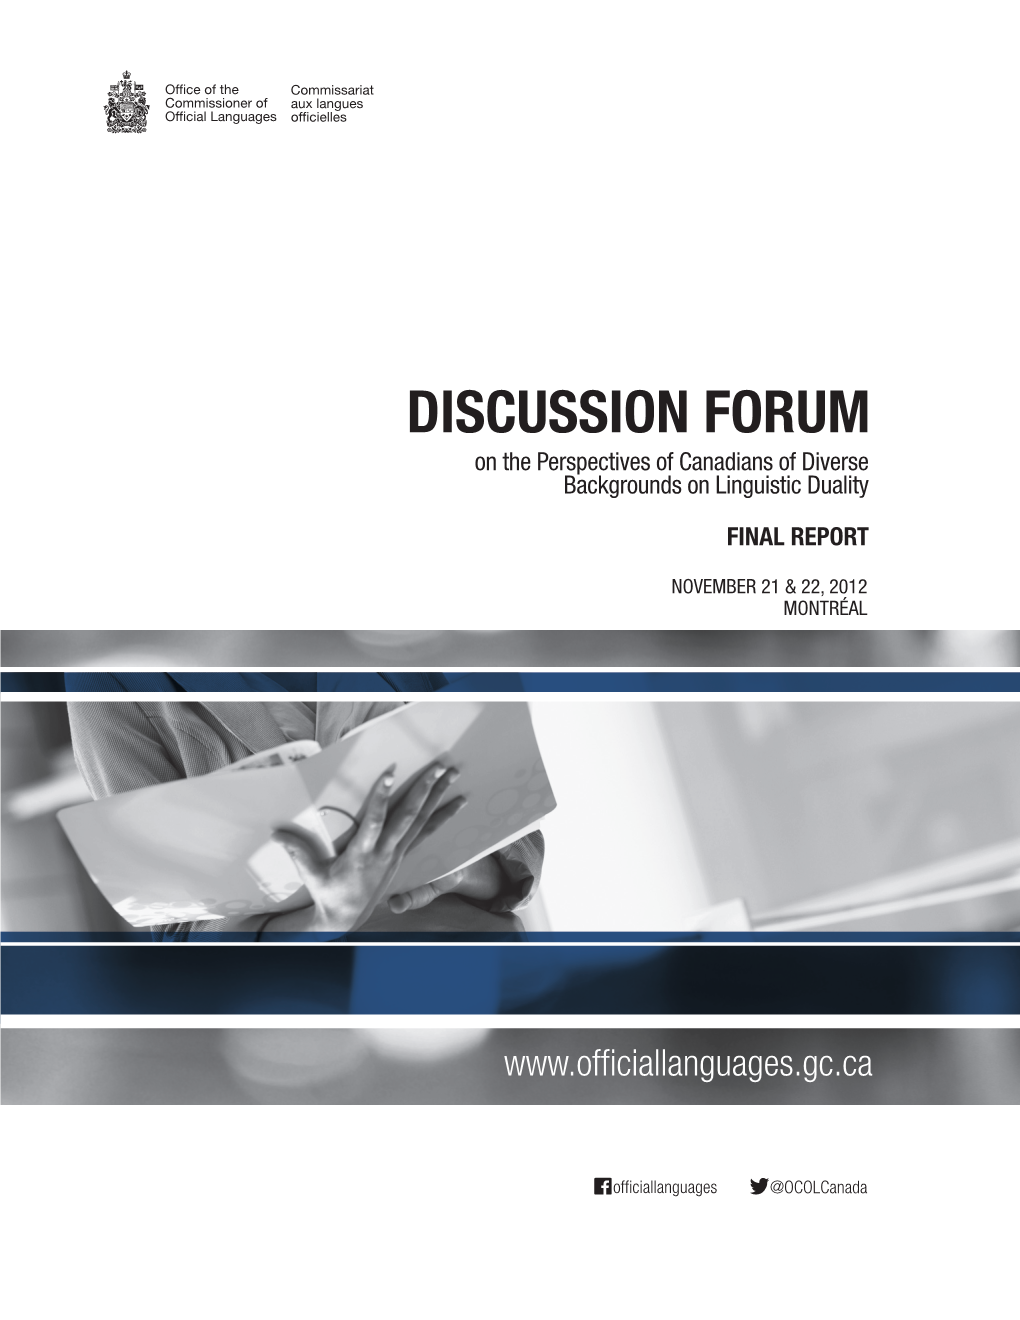 DISCUSSION FORUM on the Perspectives of Canadians of Diverse Backgrounds on Linguistic Duality